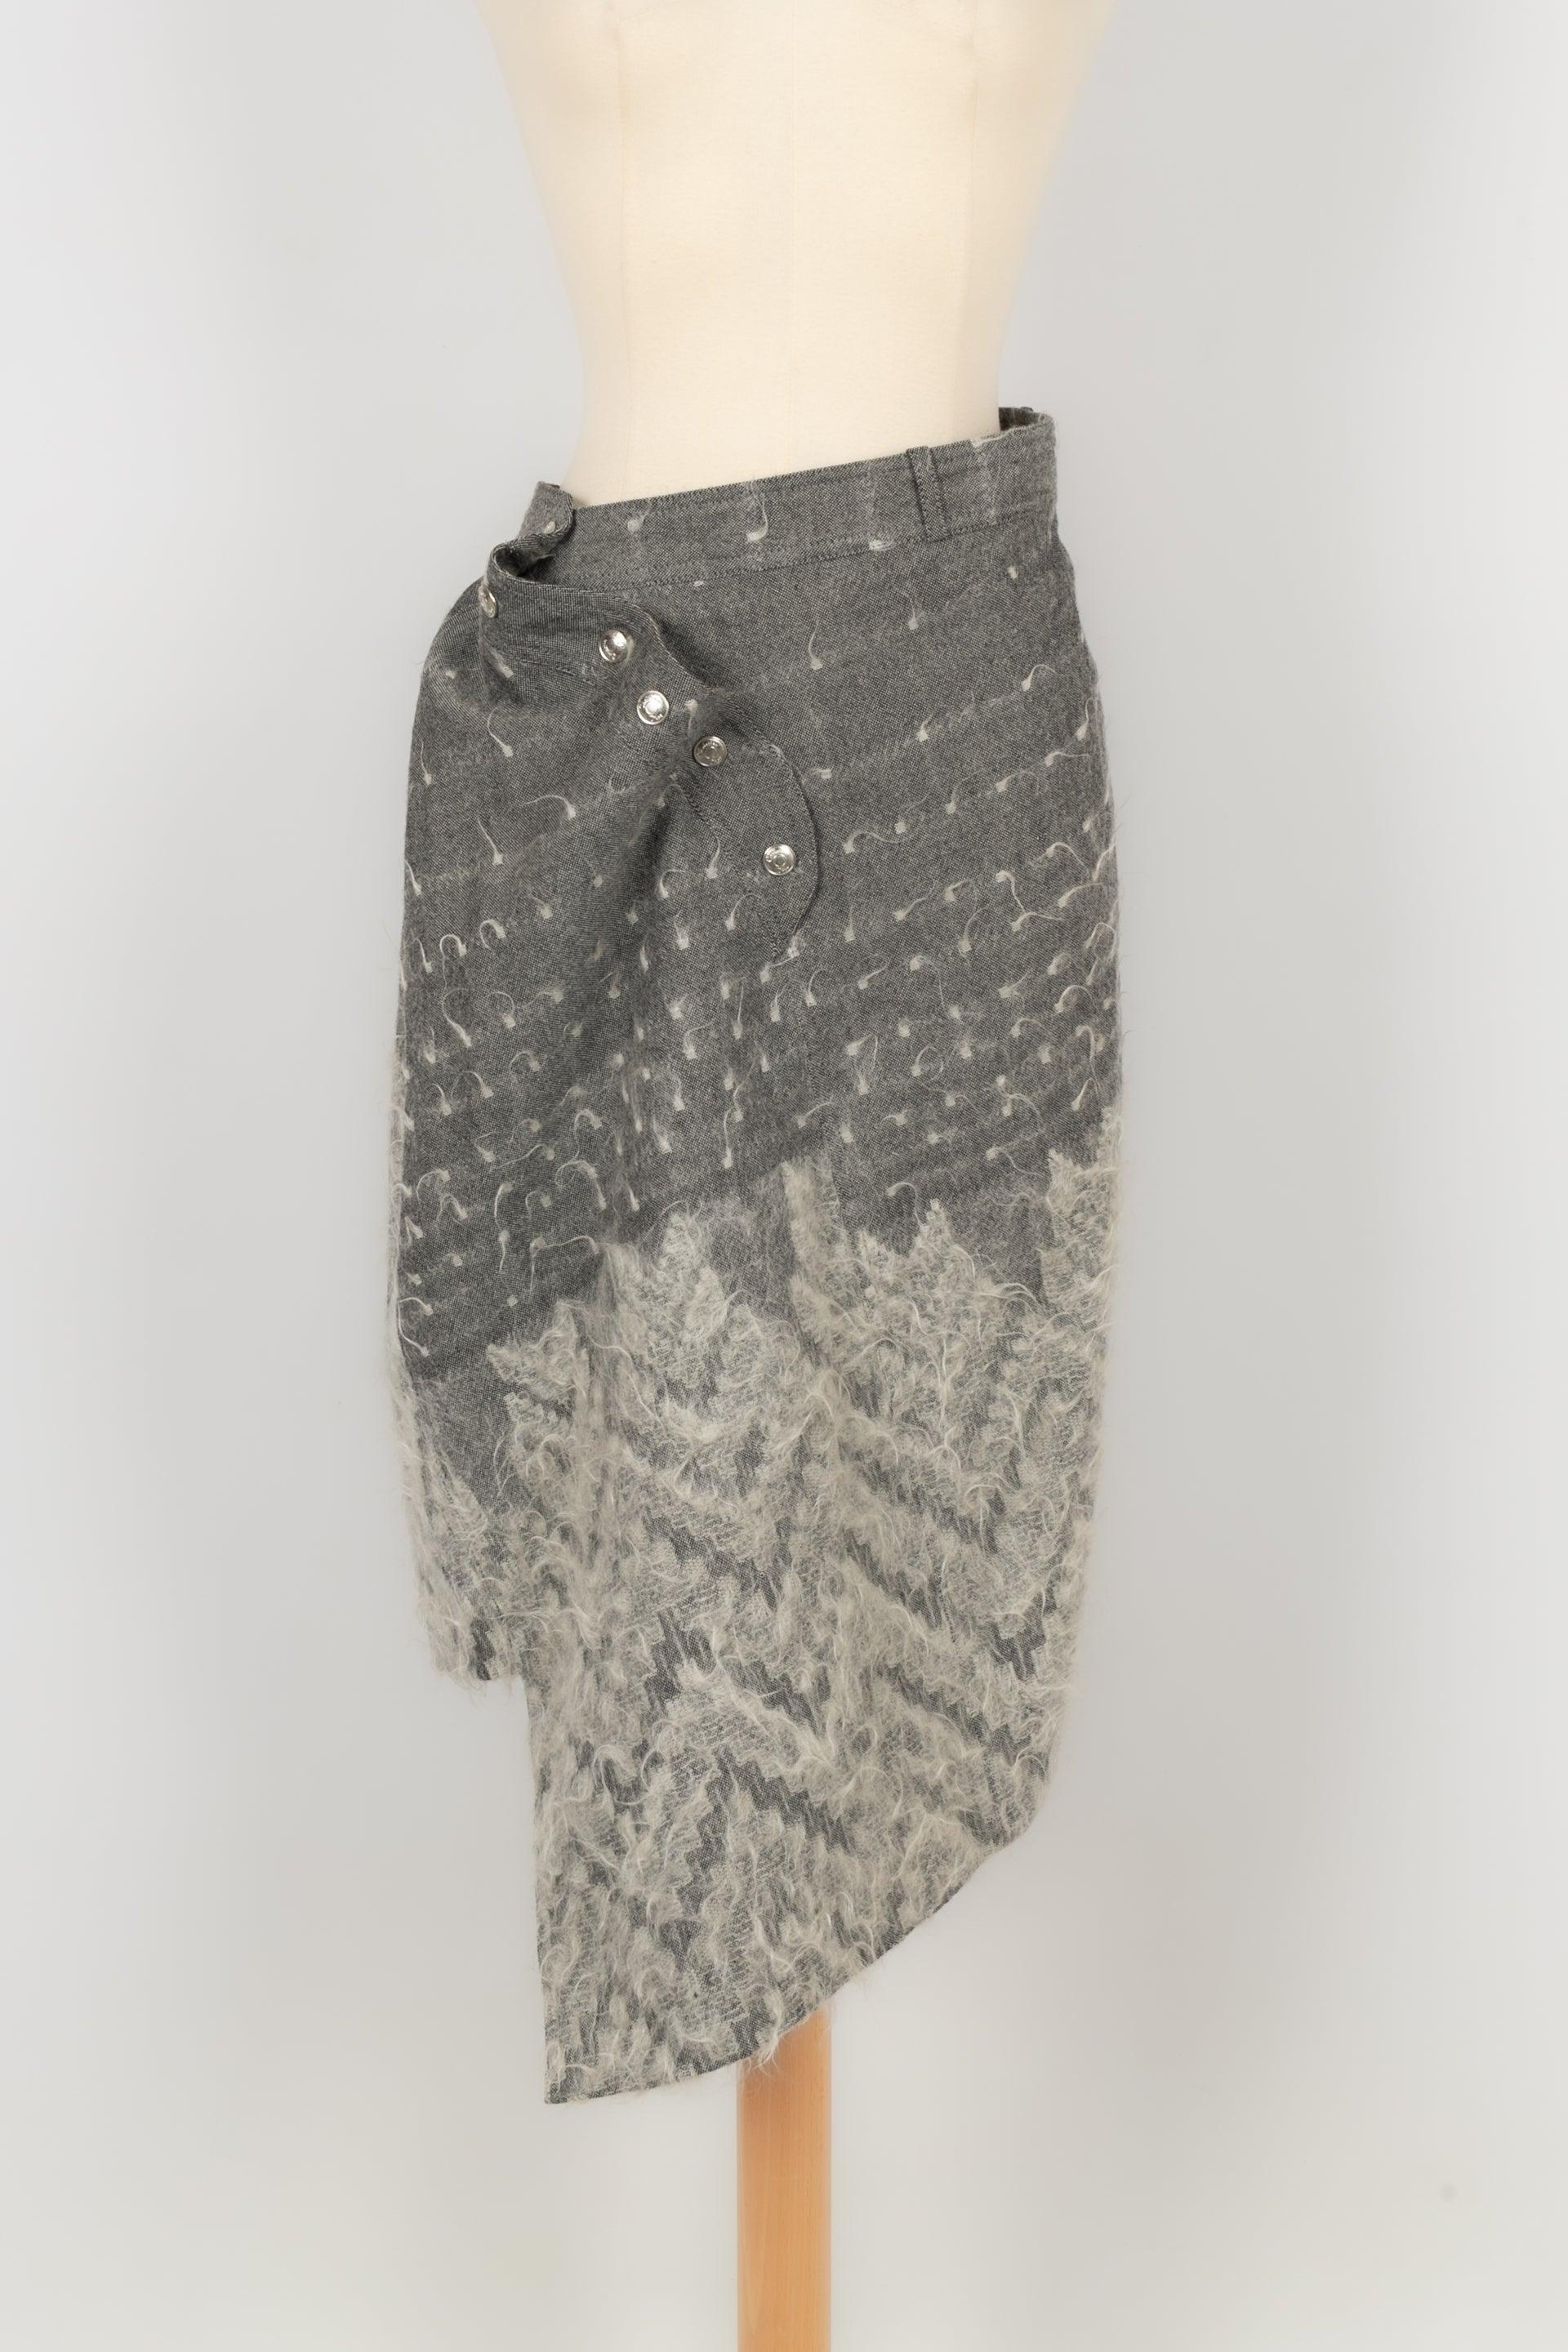 Dior - (Made in France) Mohair and wool asymmetrical skirt. Indicated size 42FR.

Additional information:
Condition: Very good condition
Dimensions: Waist: 40 cm
Maximum length: 78 cm

Seller reference: FJ68